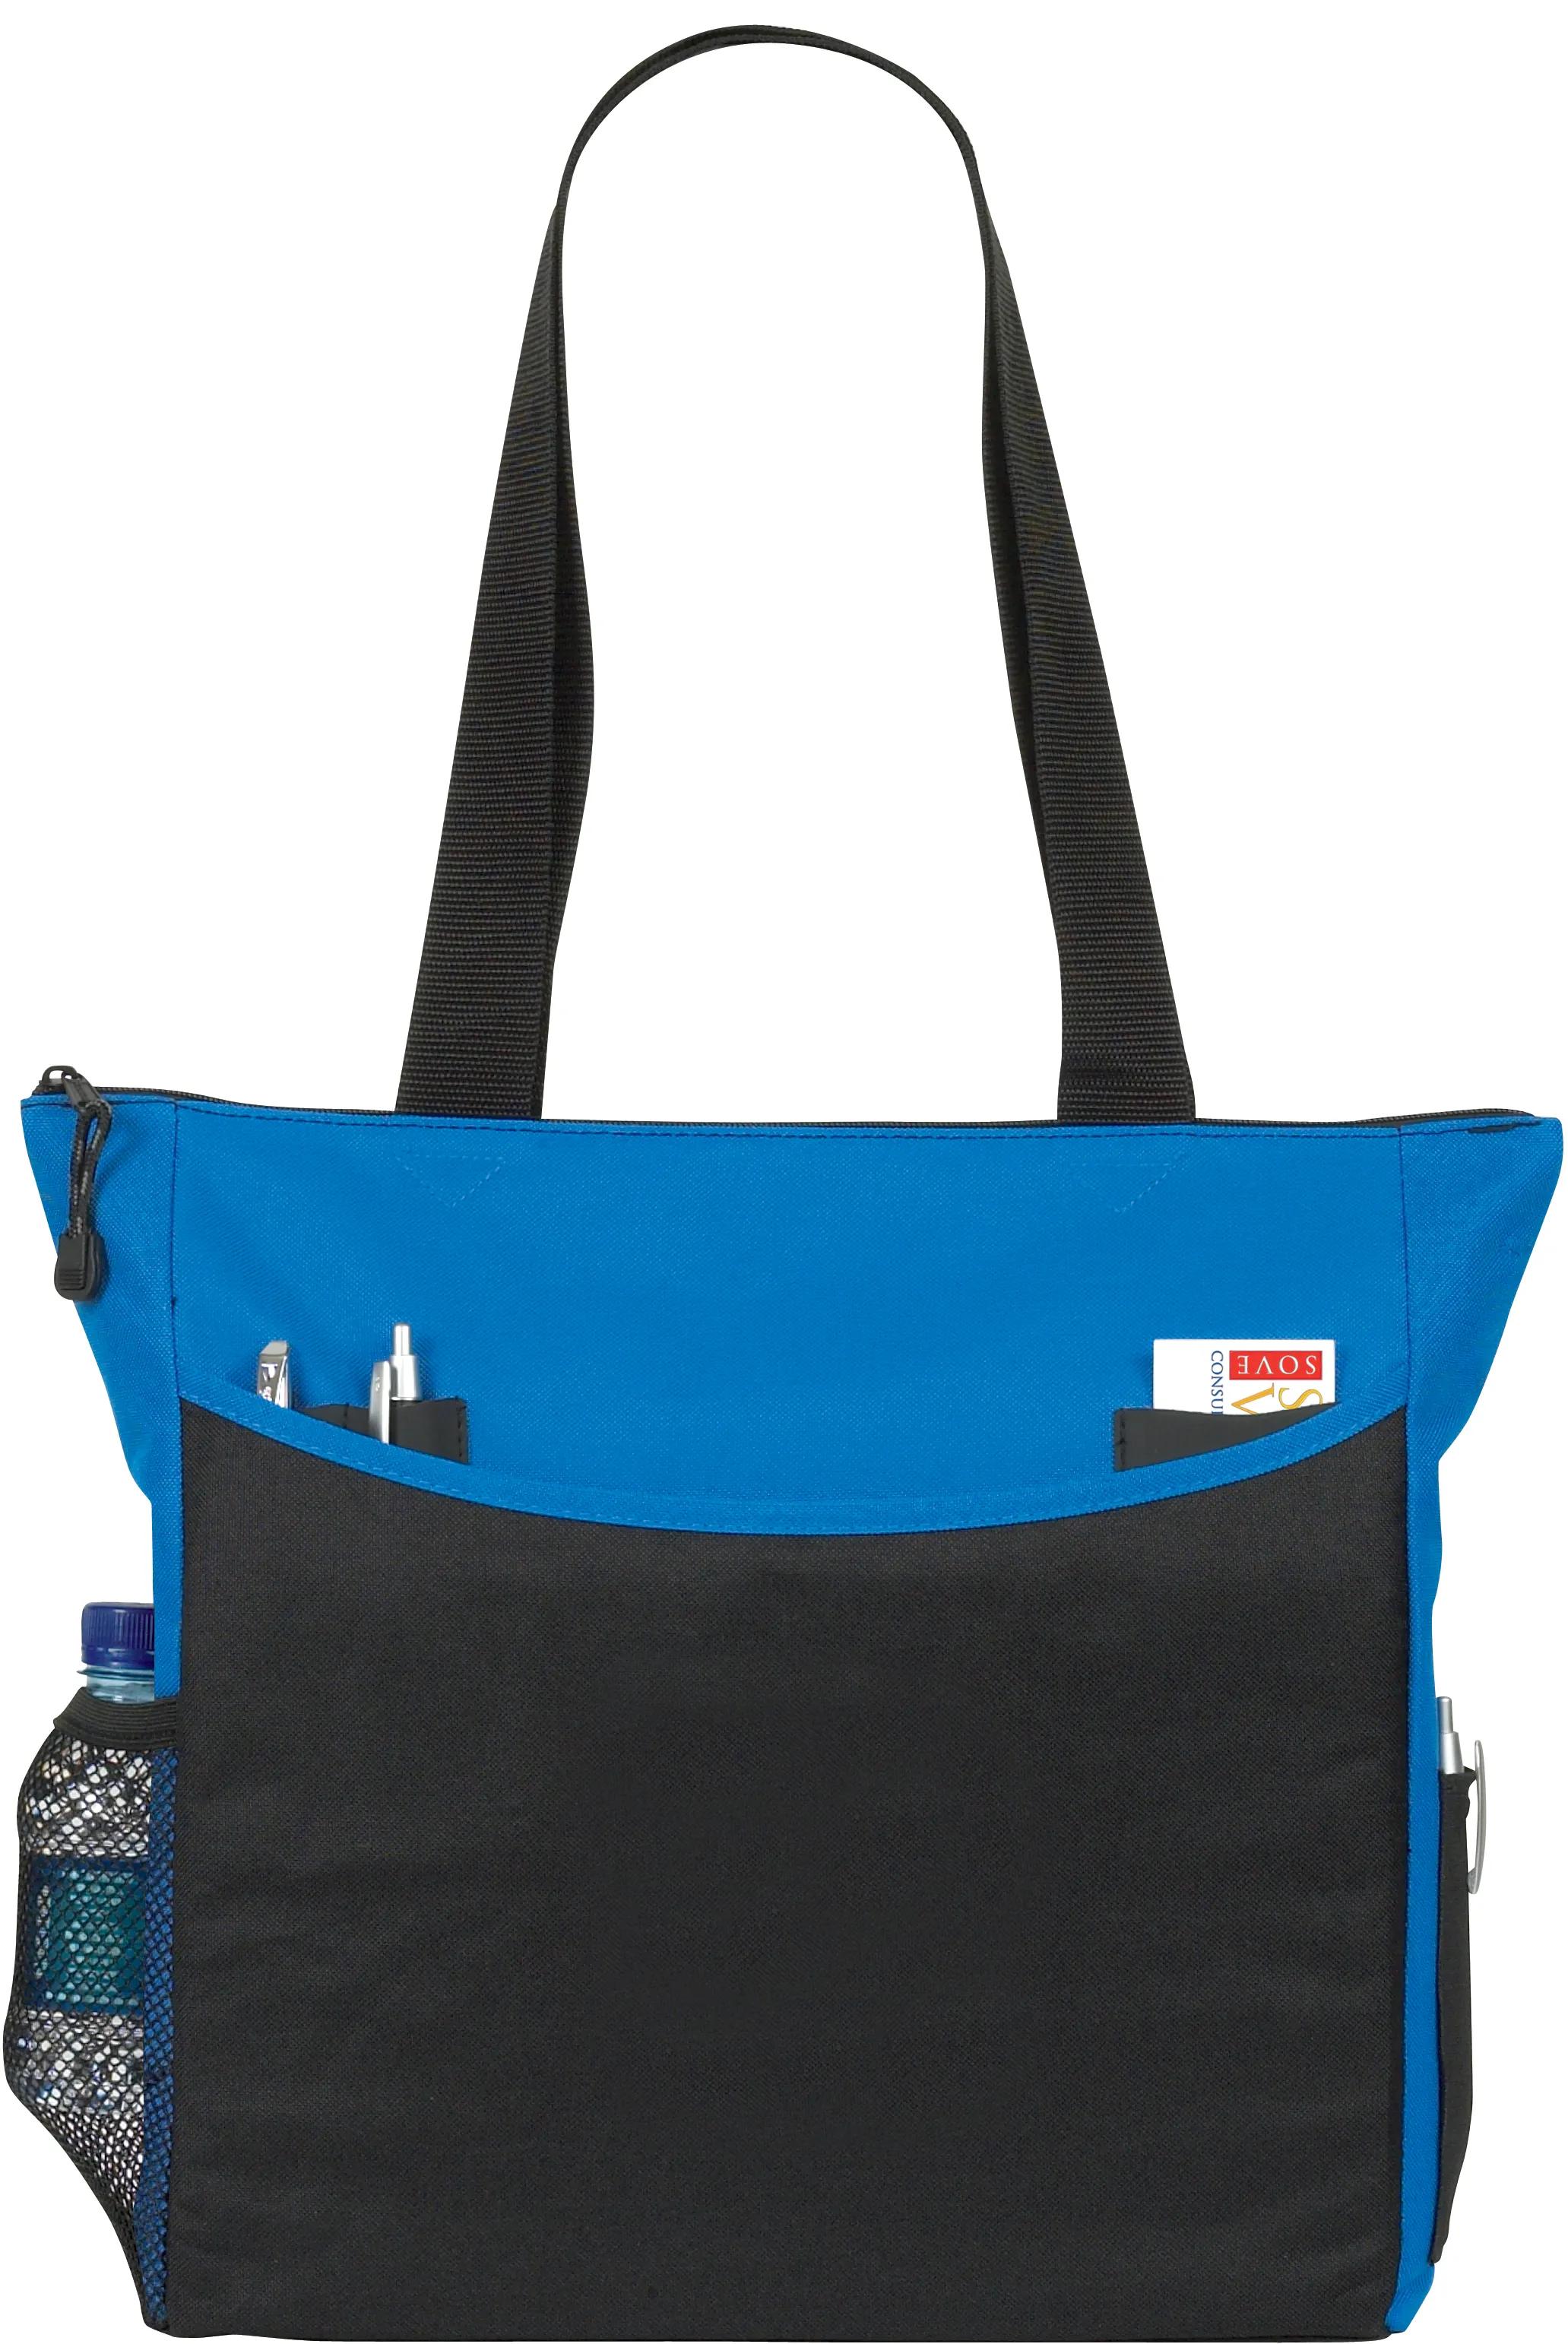 TranSport It Tote 3 of 40